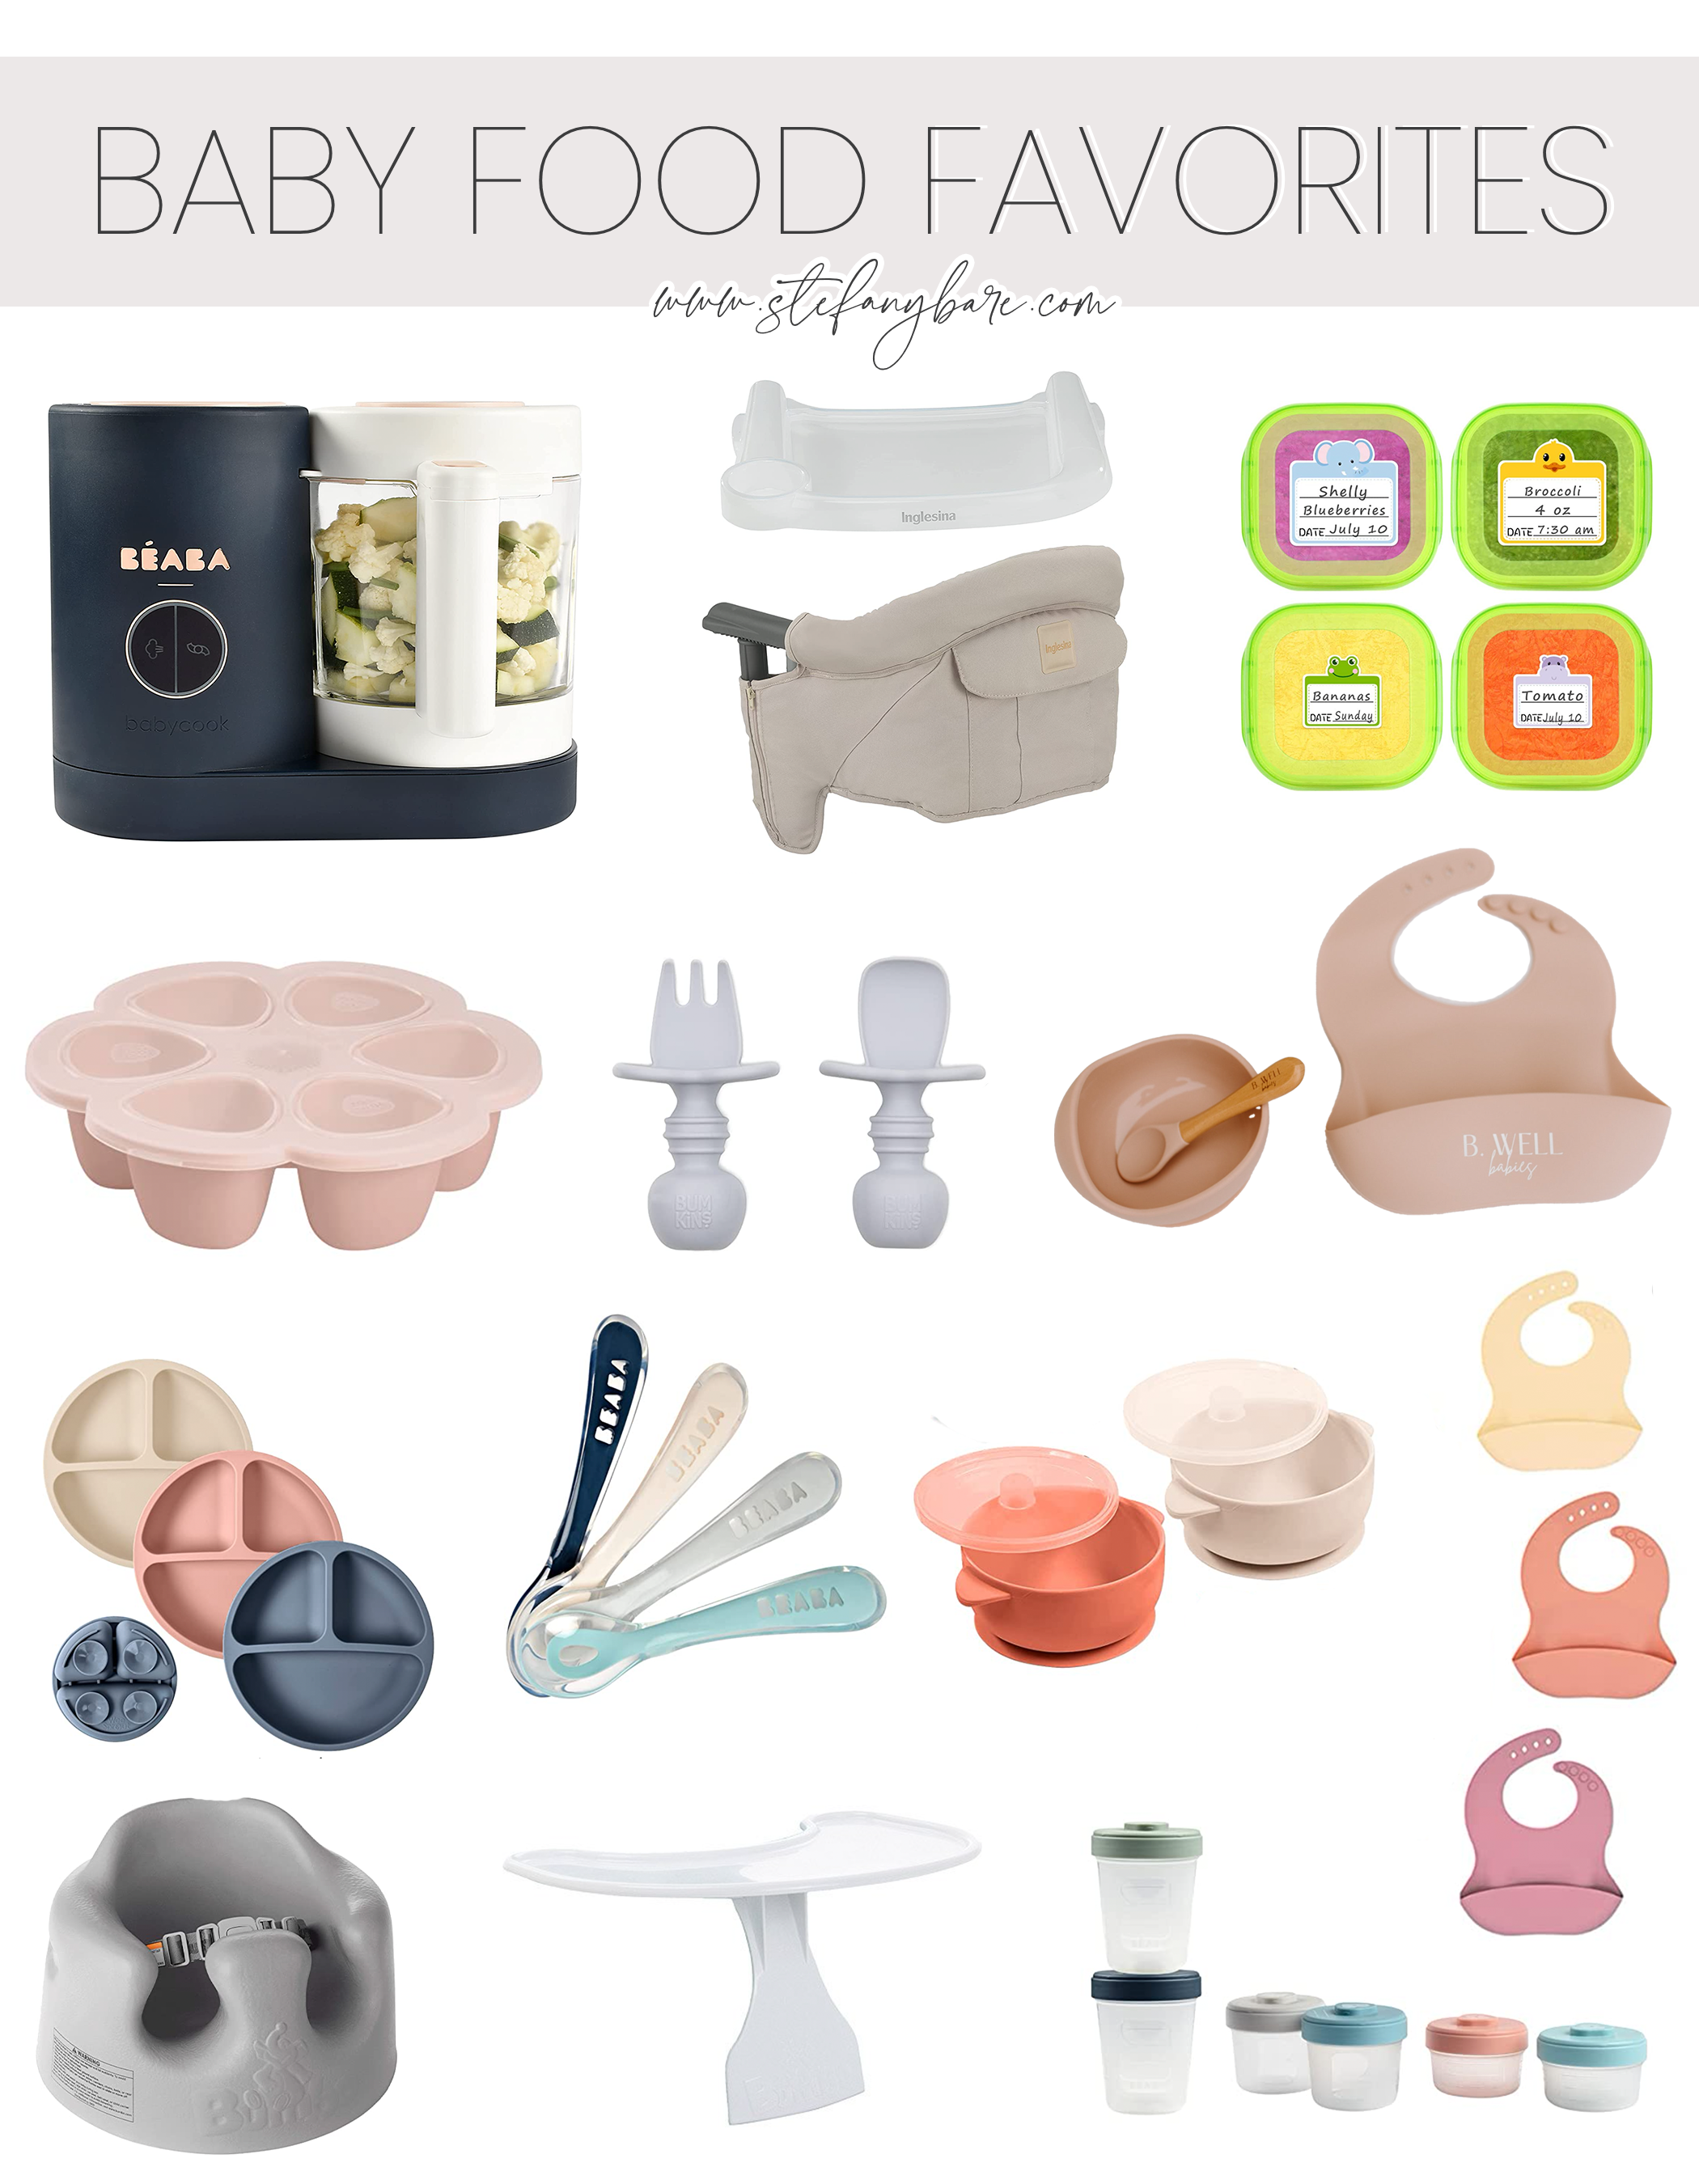 Laundry Must-Haves - Stefany Bare Blog